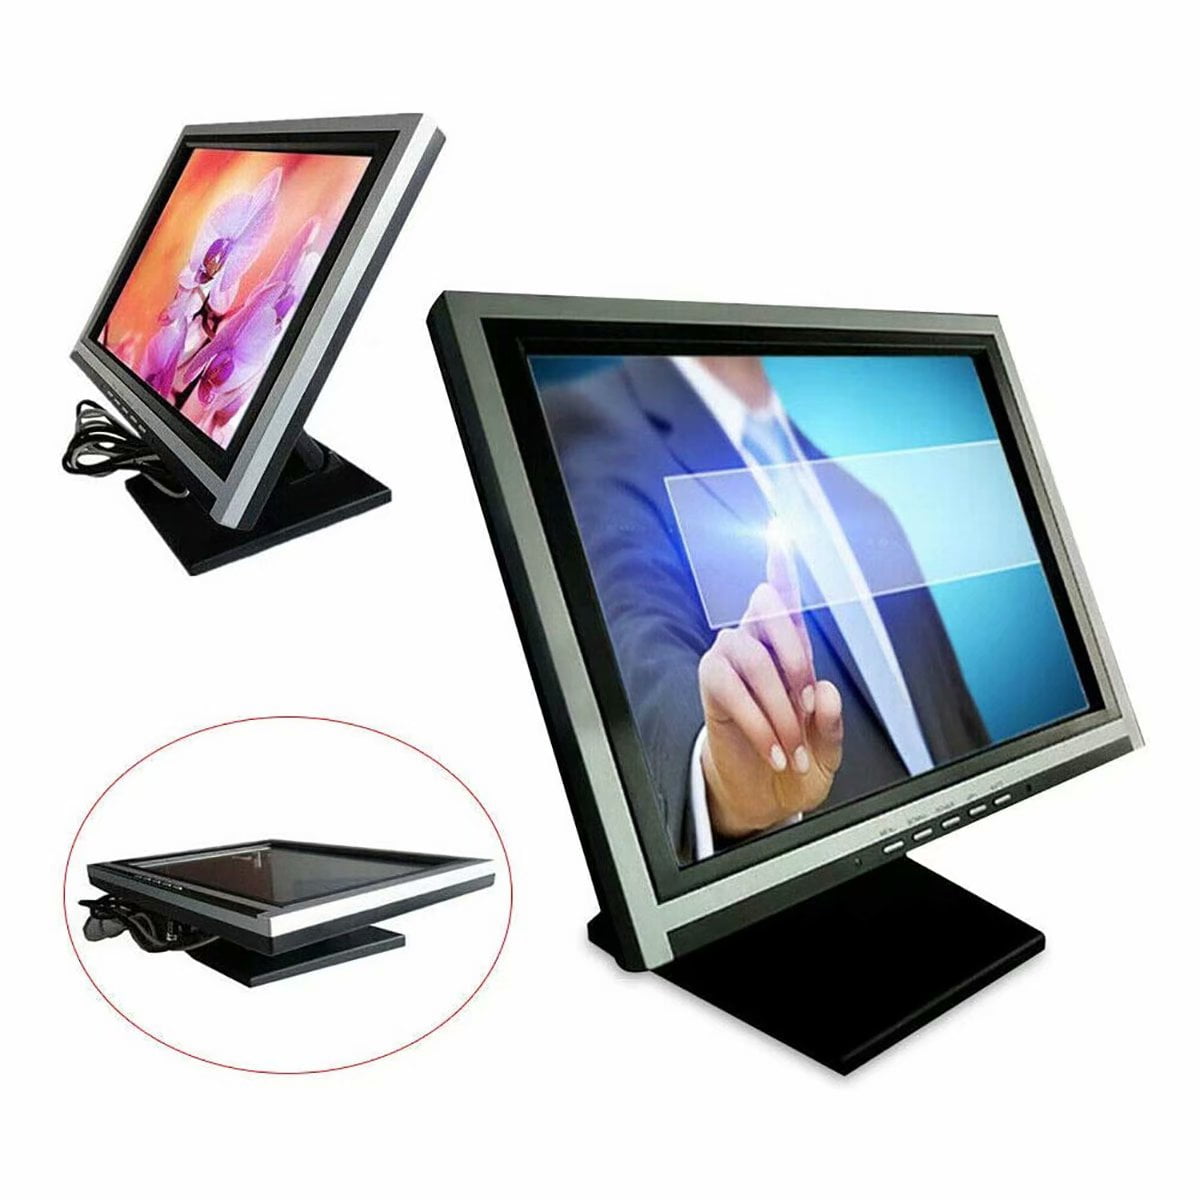 15'' VGA LED Touch Screen Monitor Display HDMI For POS Retail Restaurant Bar NEW 